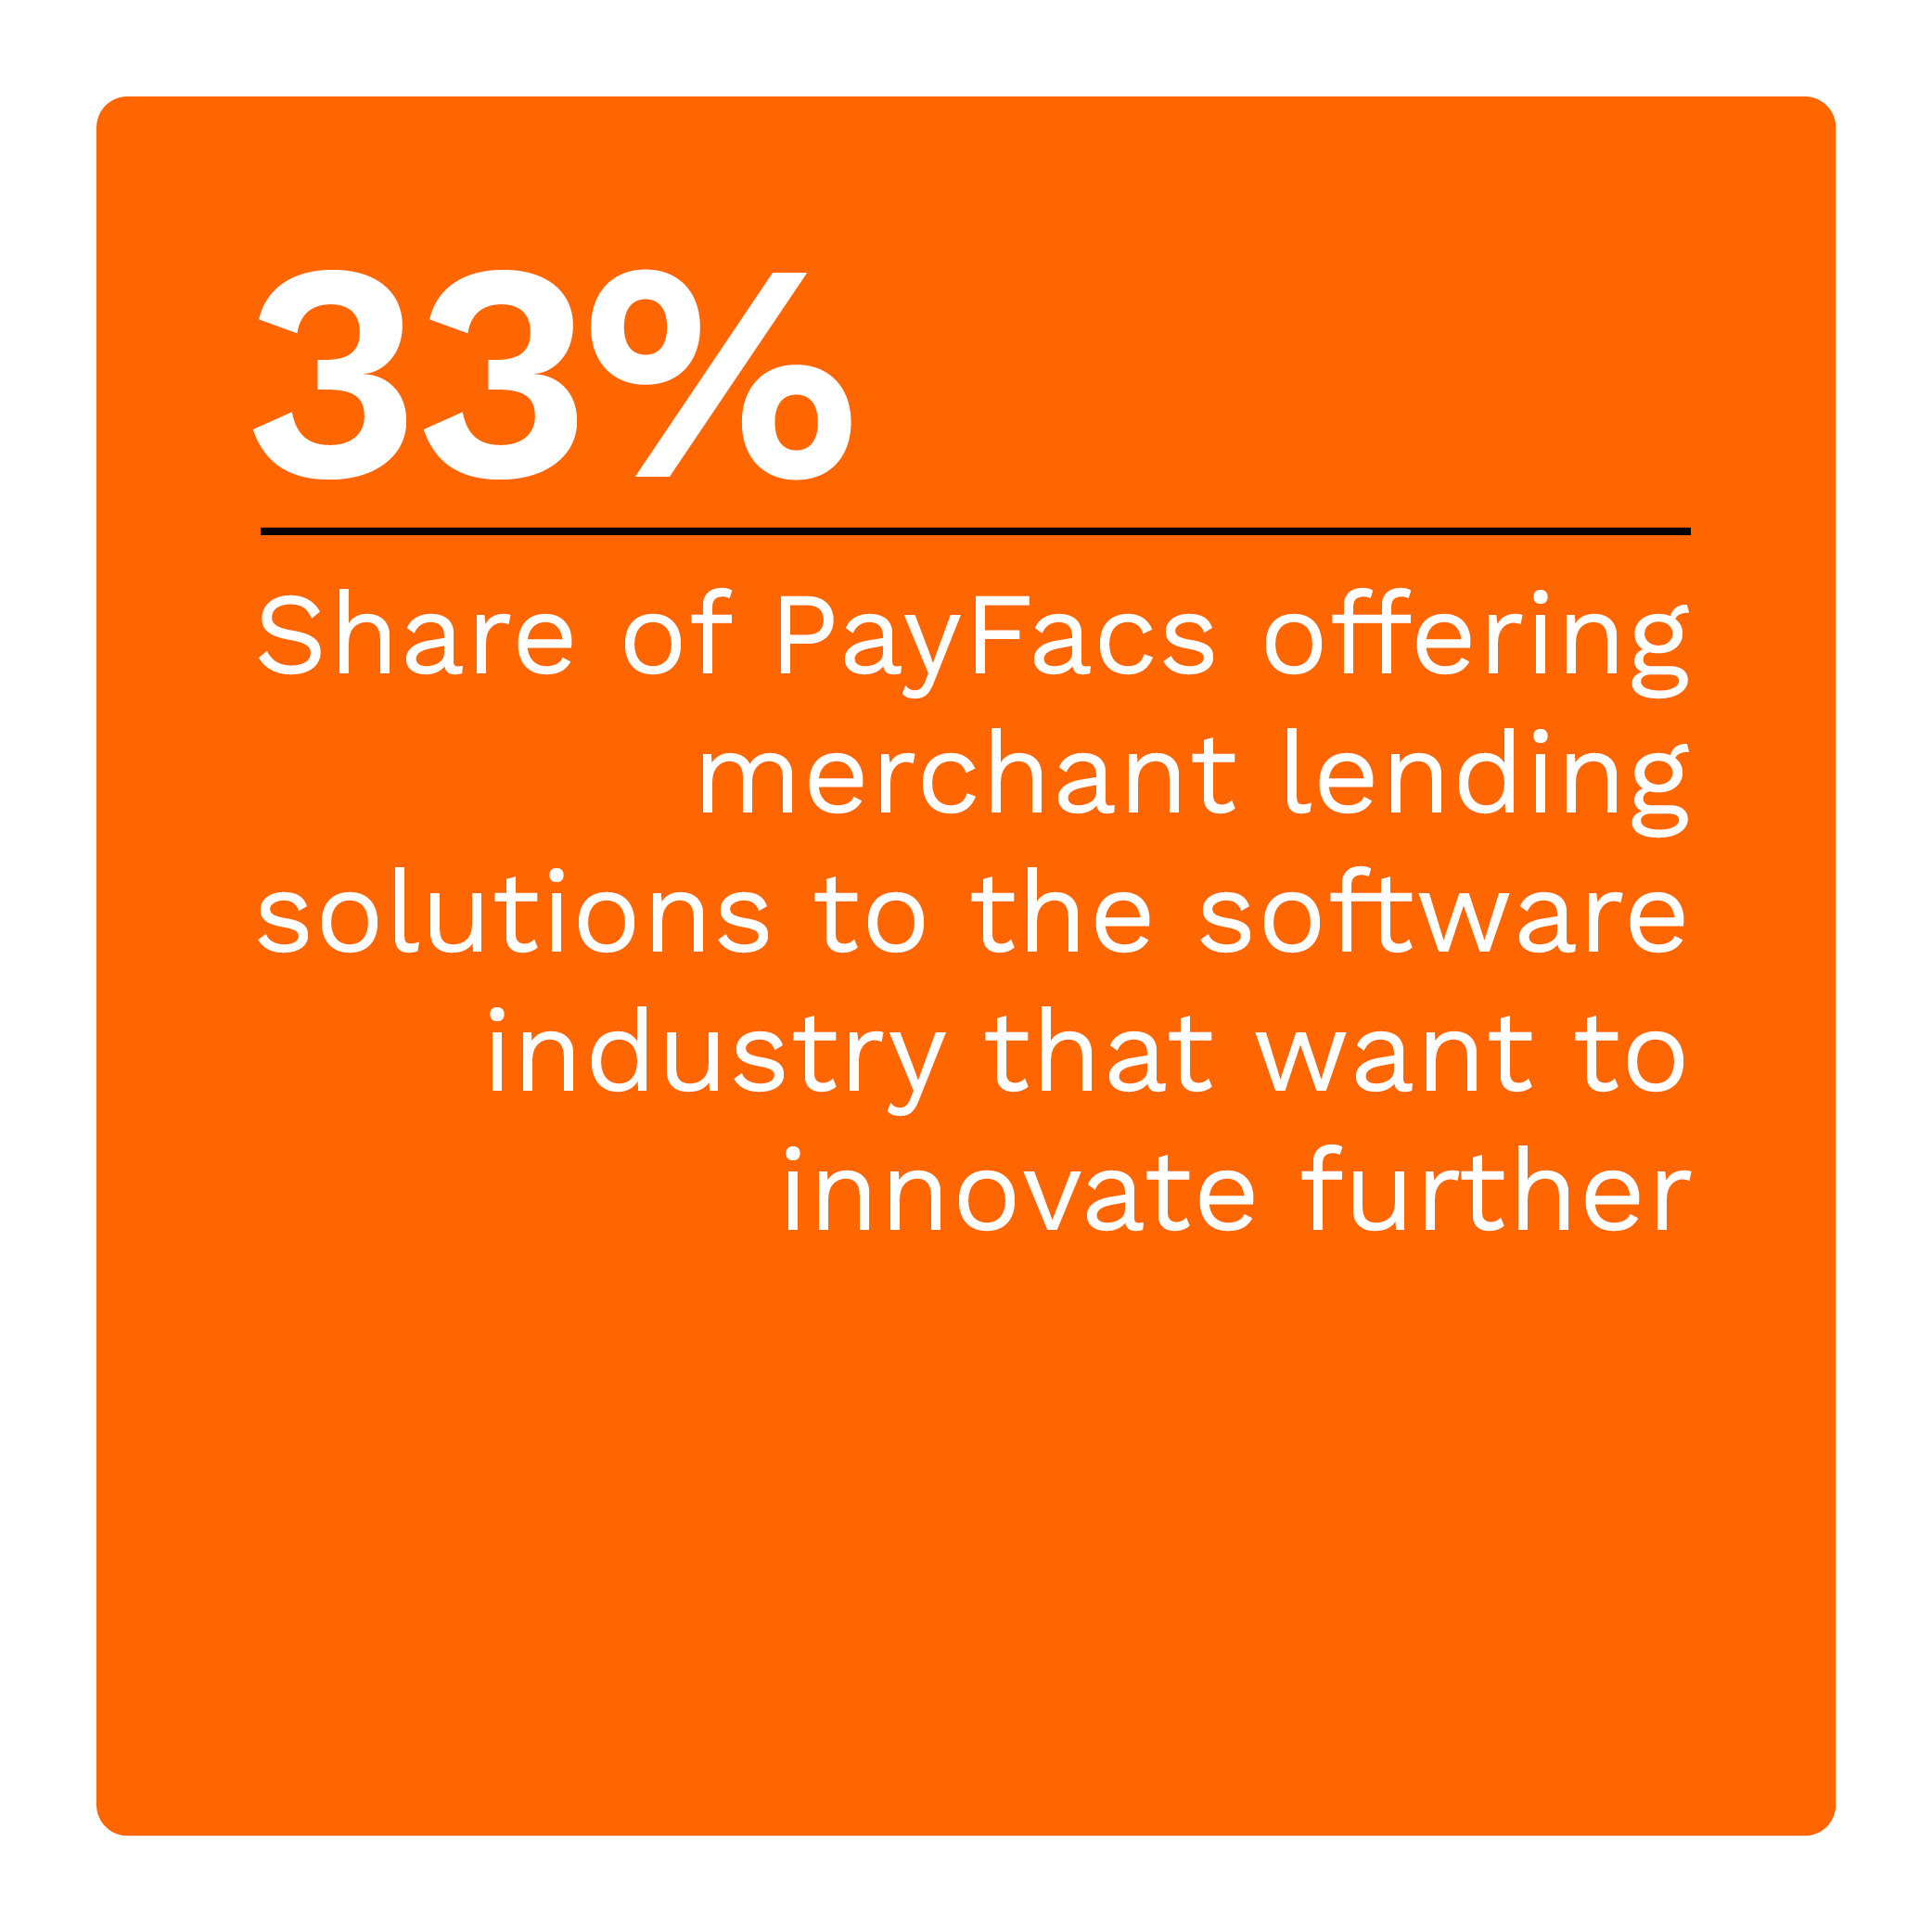 33%: Share of PayFacs offering merchant lending solutions to the software industry that want to innovate further